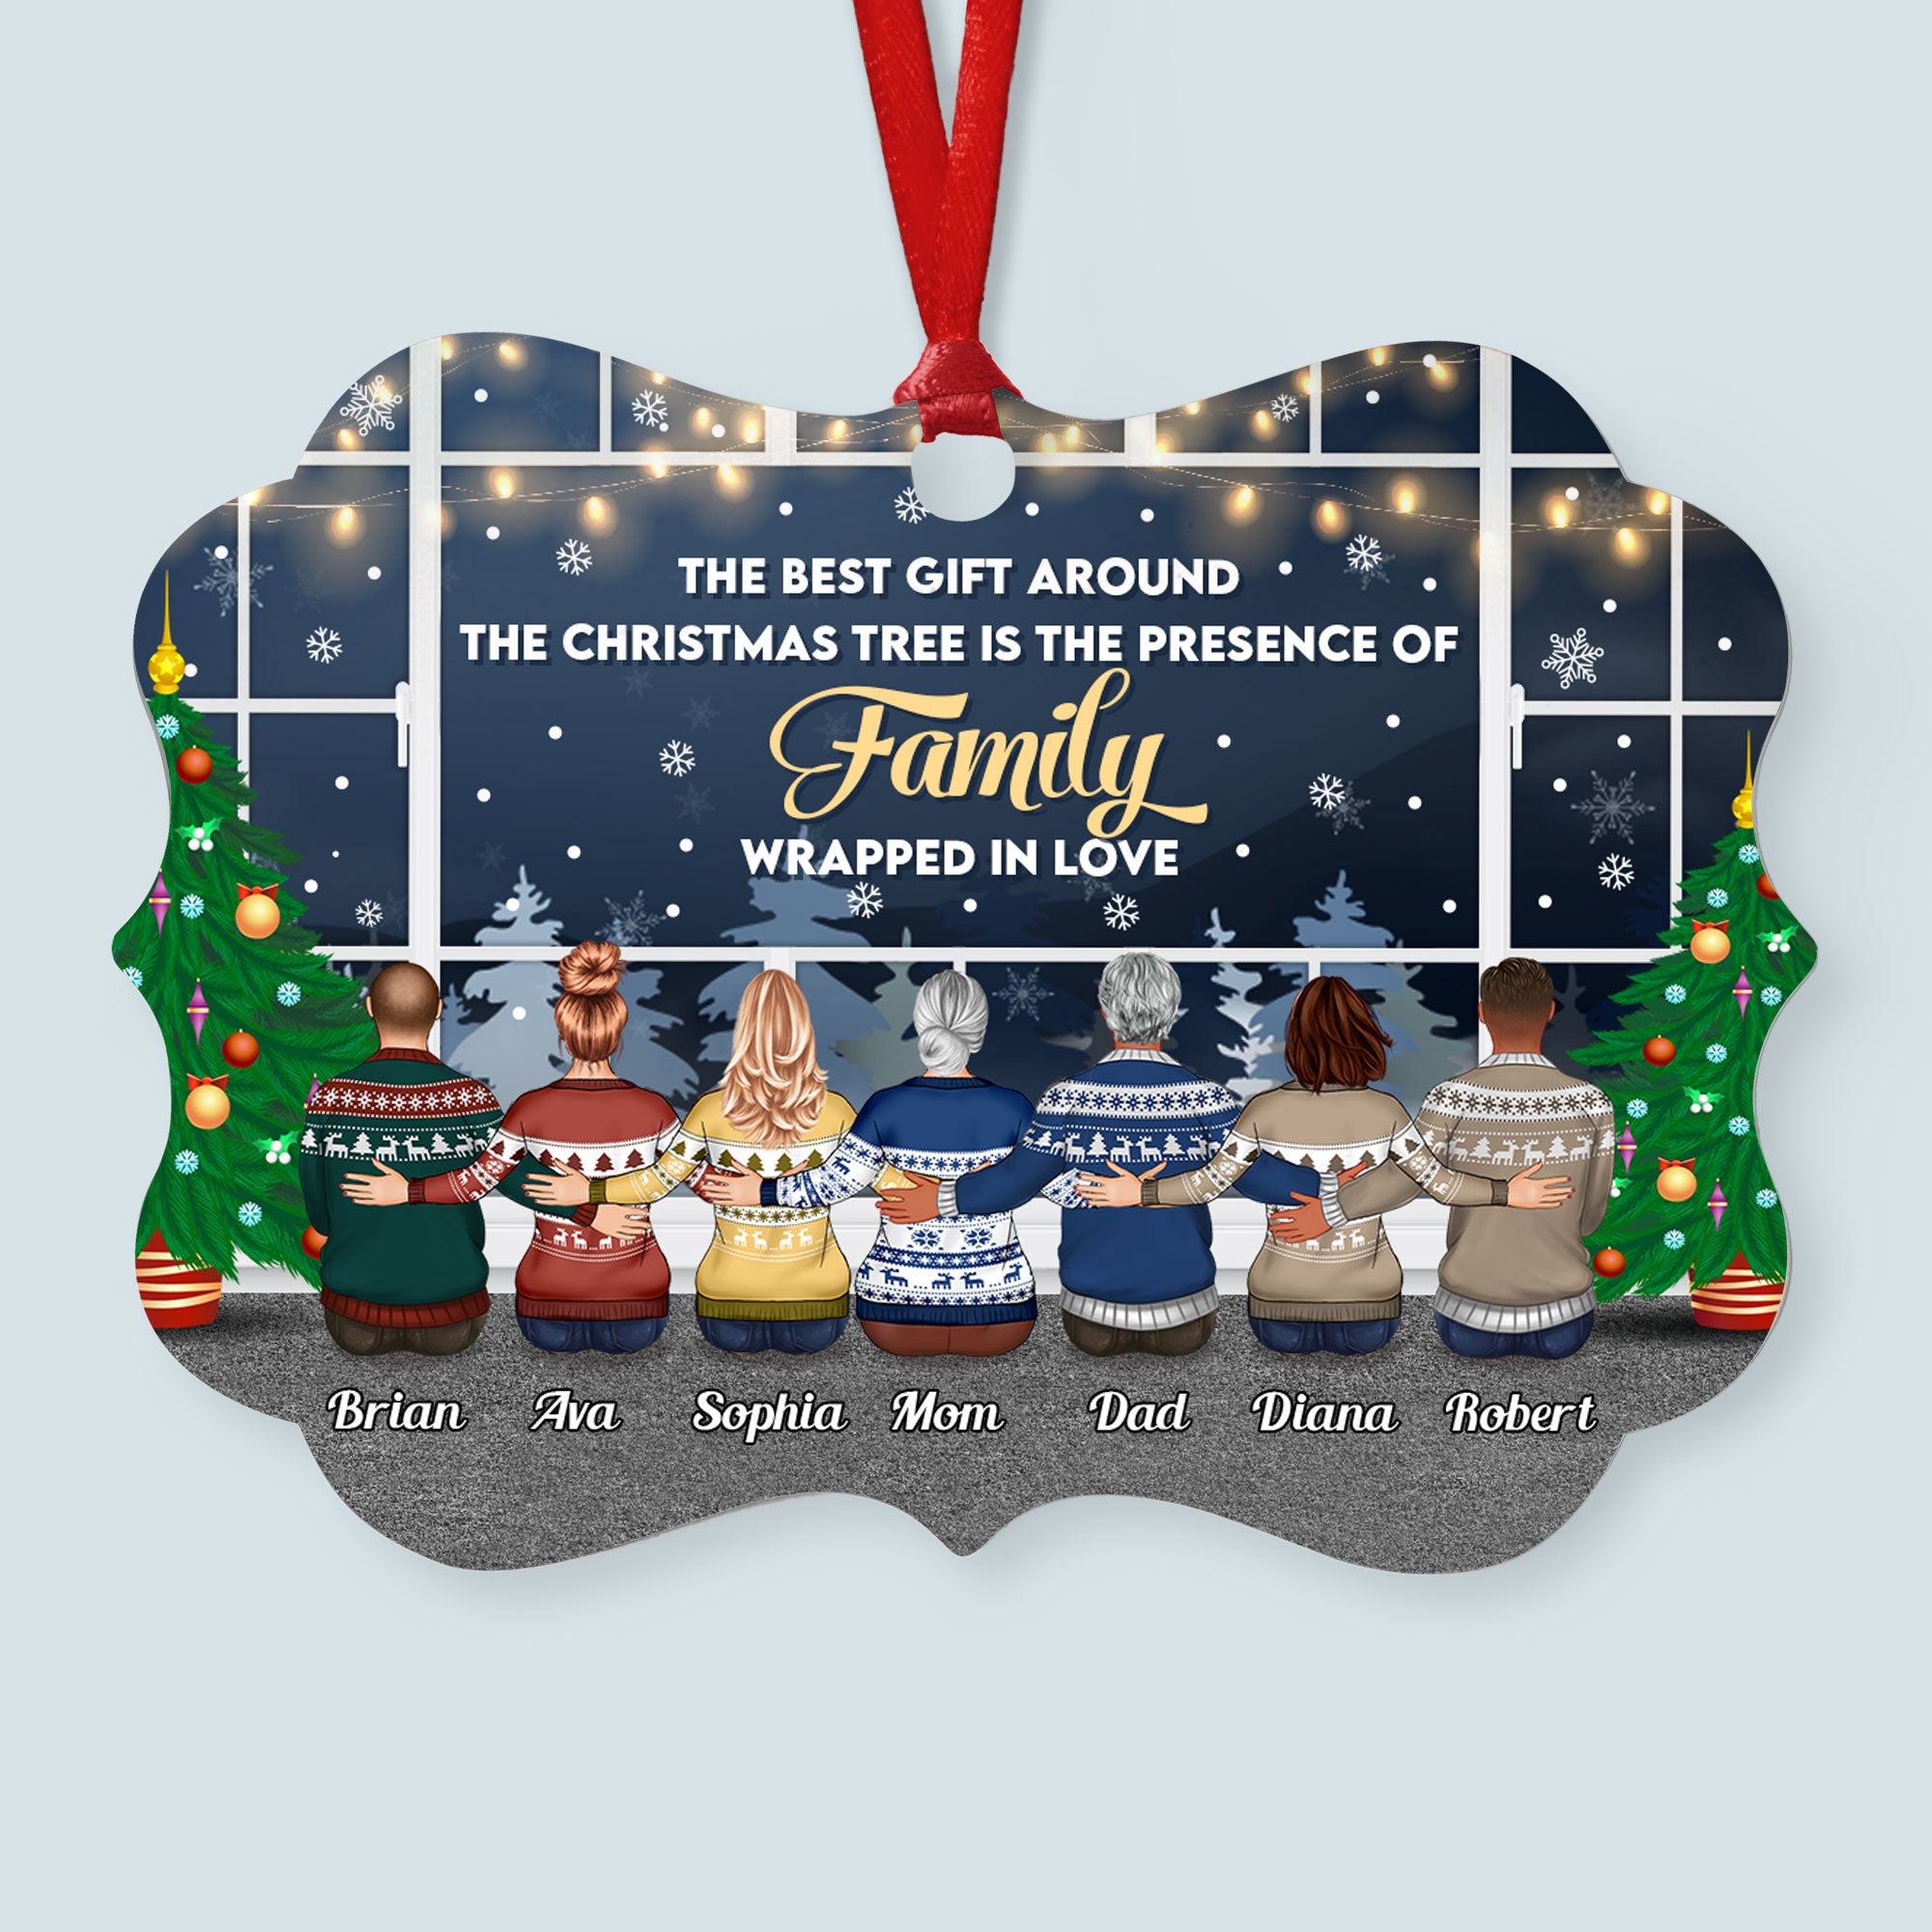 https://cdn.shopify.com/s/files/1/0499/6379/4592/products/The-Presence-Of-Family-Wrapped-In-Love-Personalized-Aluminum-Ornament-Christmas-Gift-For-Family-Members-Sisters-Brothers-Best-Friends_1.jpg?v=1662972008